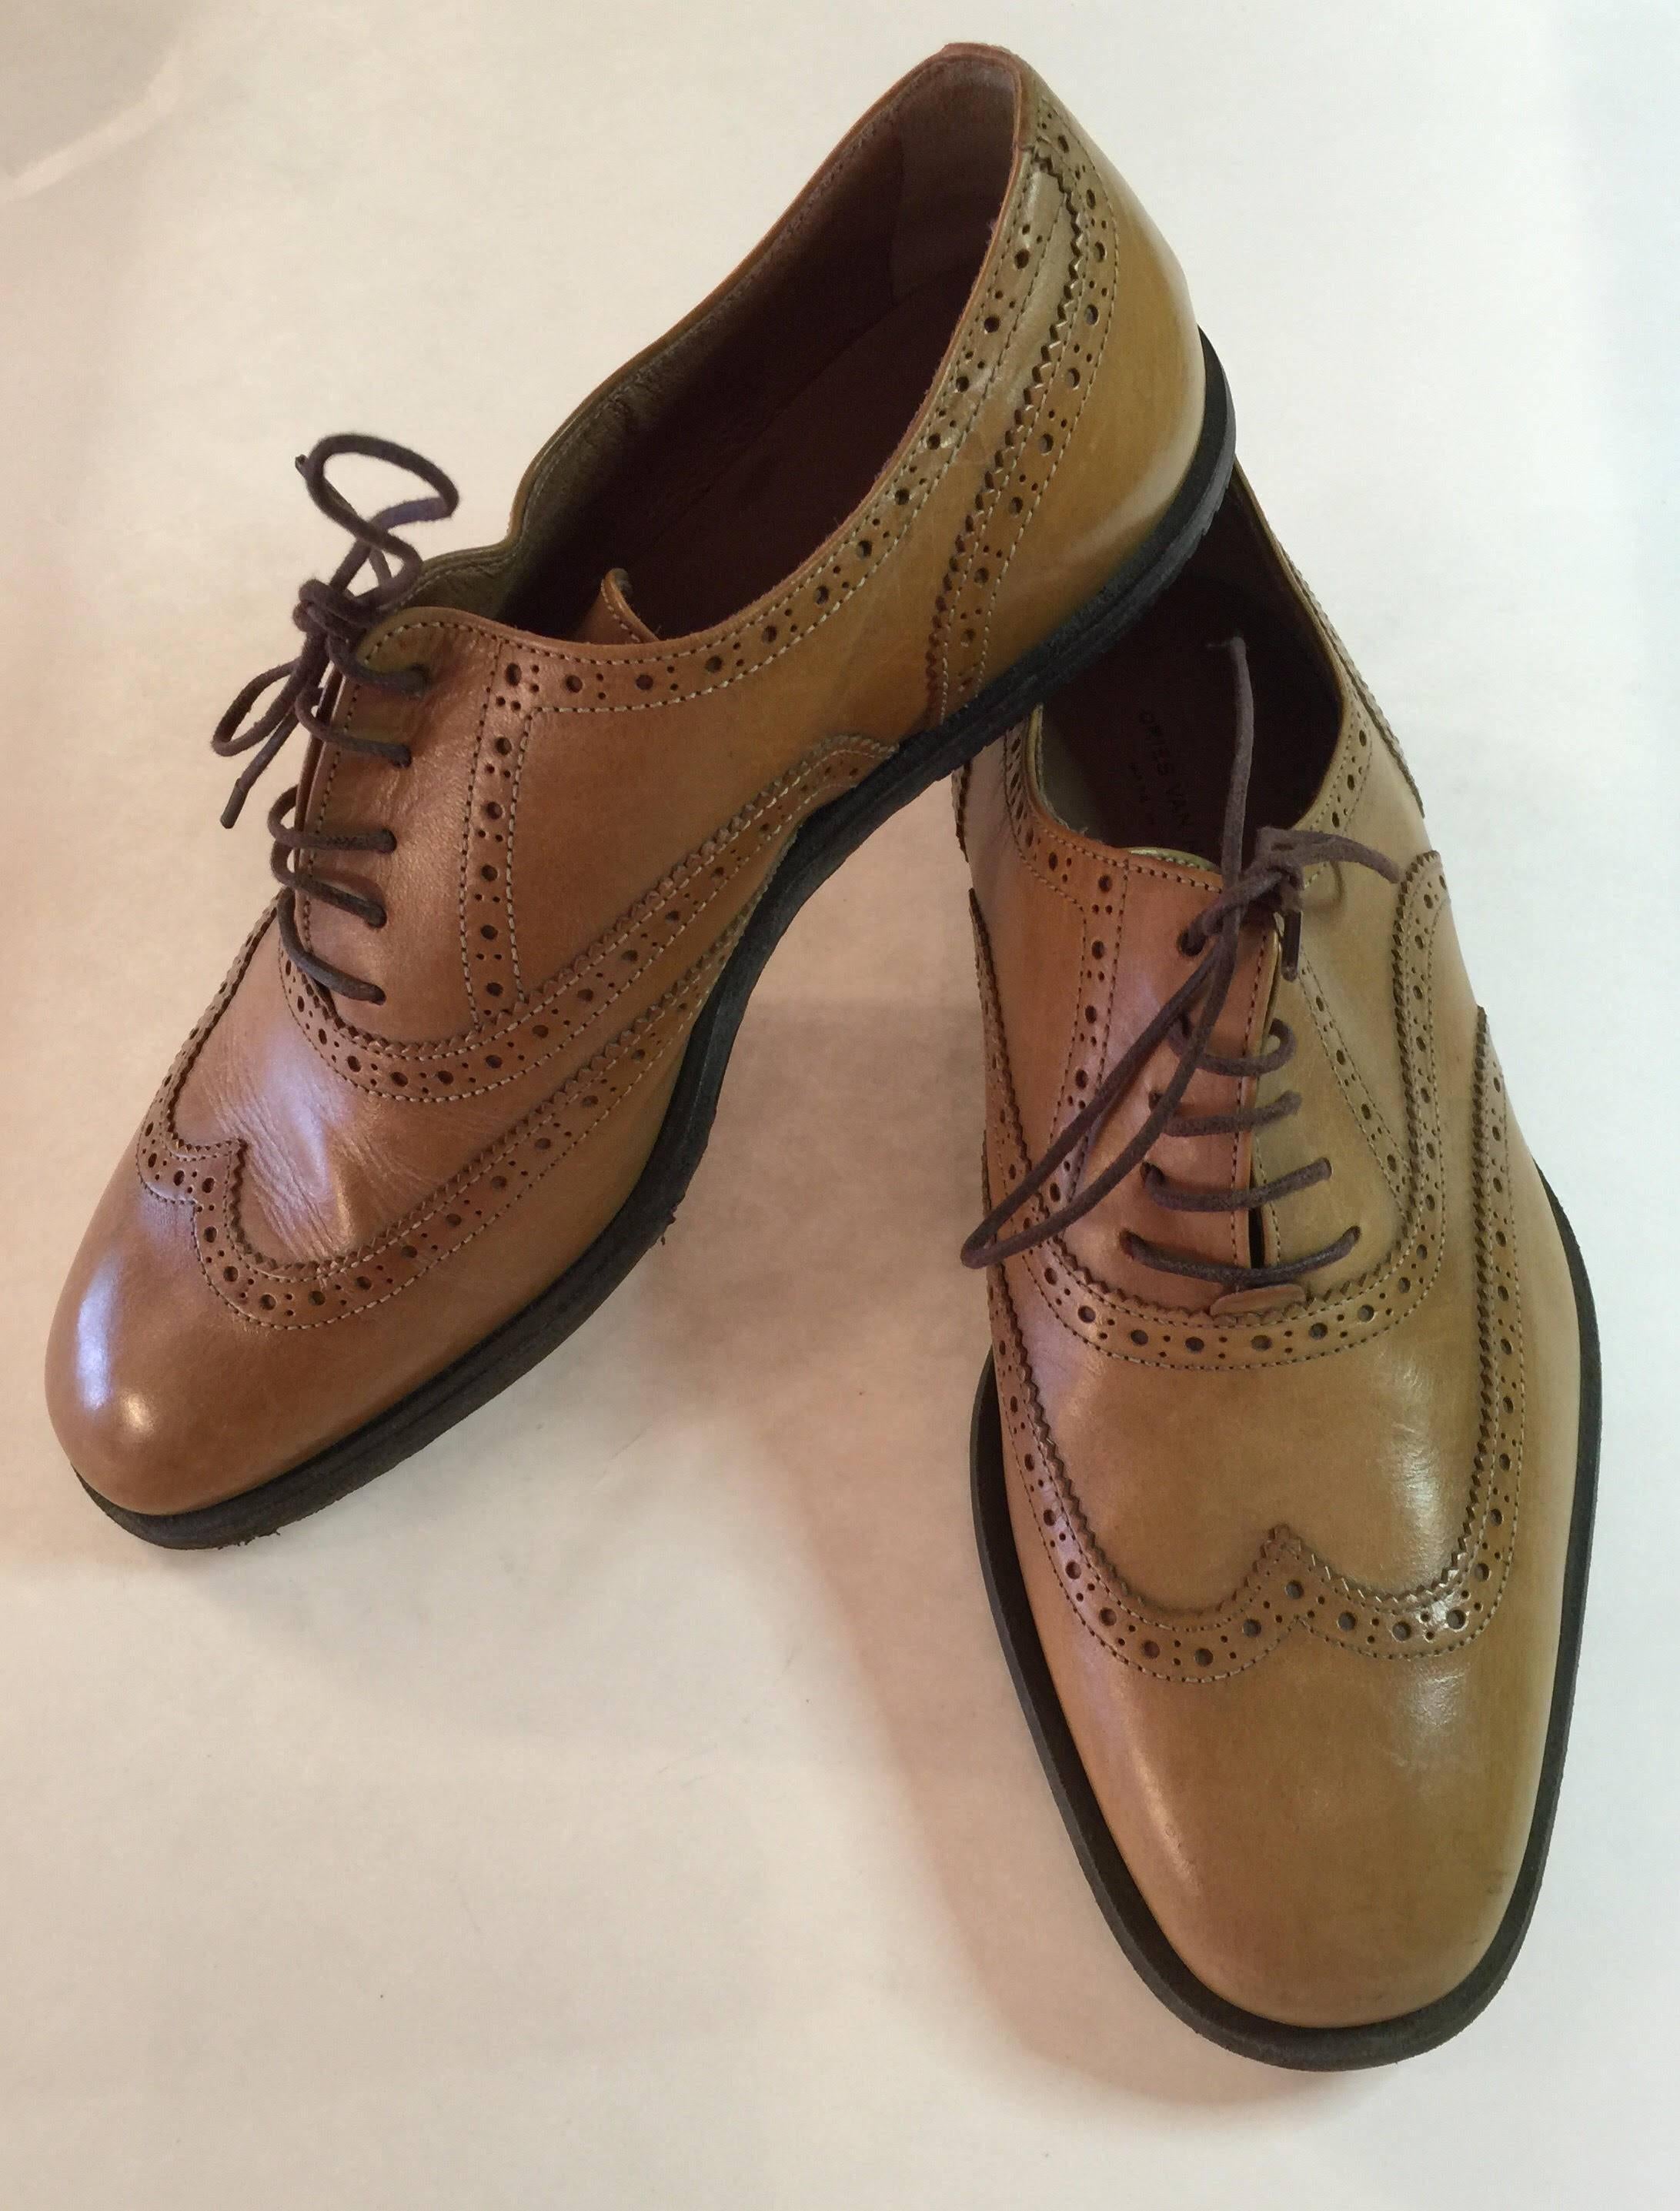 These camel Italian leather brogue oxford shoes by Dries van Noten are enblematic of classic shoe design.The Brogue is a style of low-heeled shoe or boot traditionally characterized by multiple-piece, sturdy leather uppers with decorative